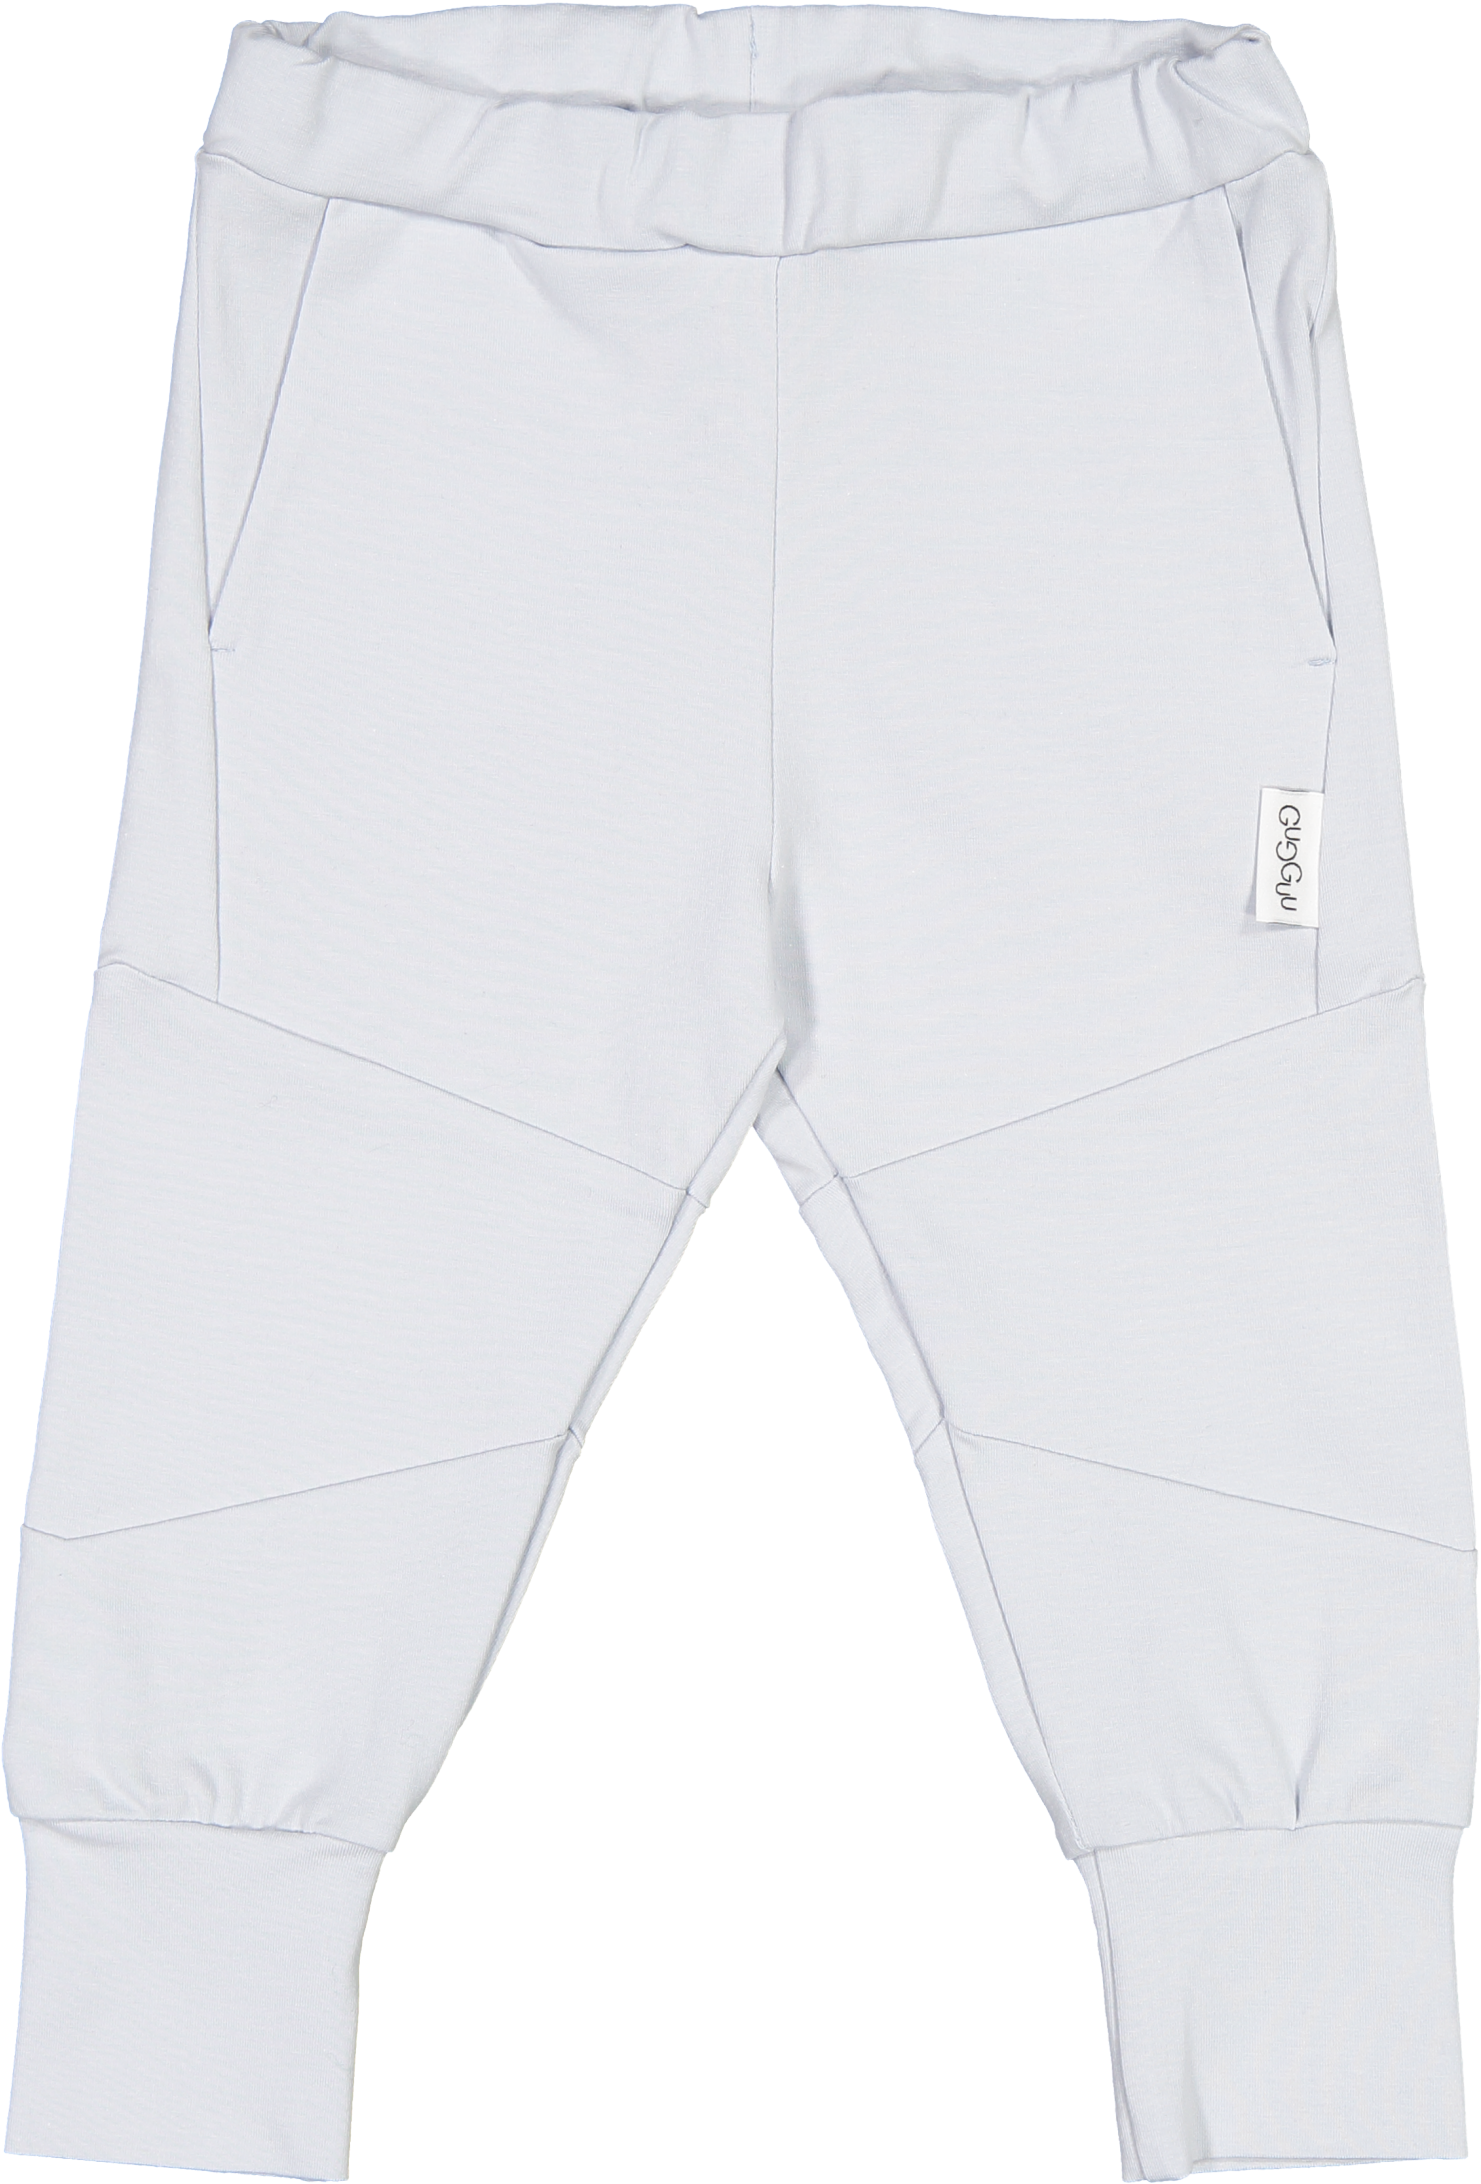 Cube Pants, White Ice - Pocket (1628x2400), Png Download